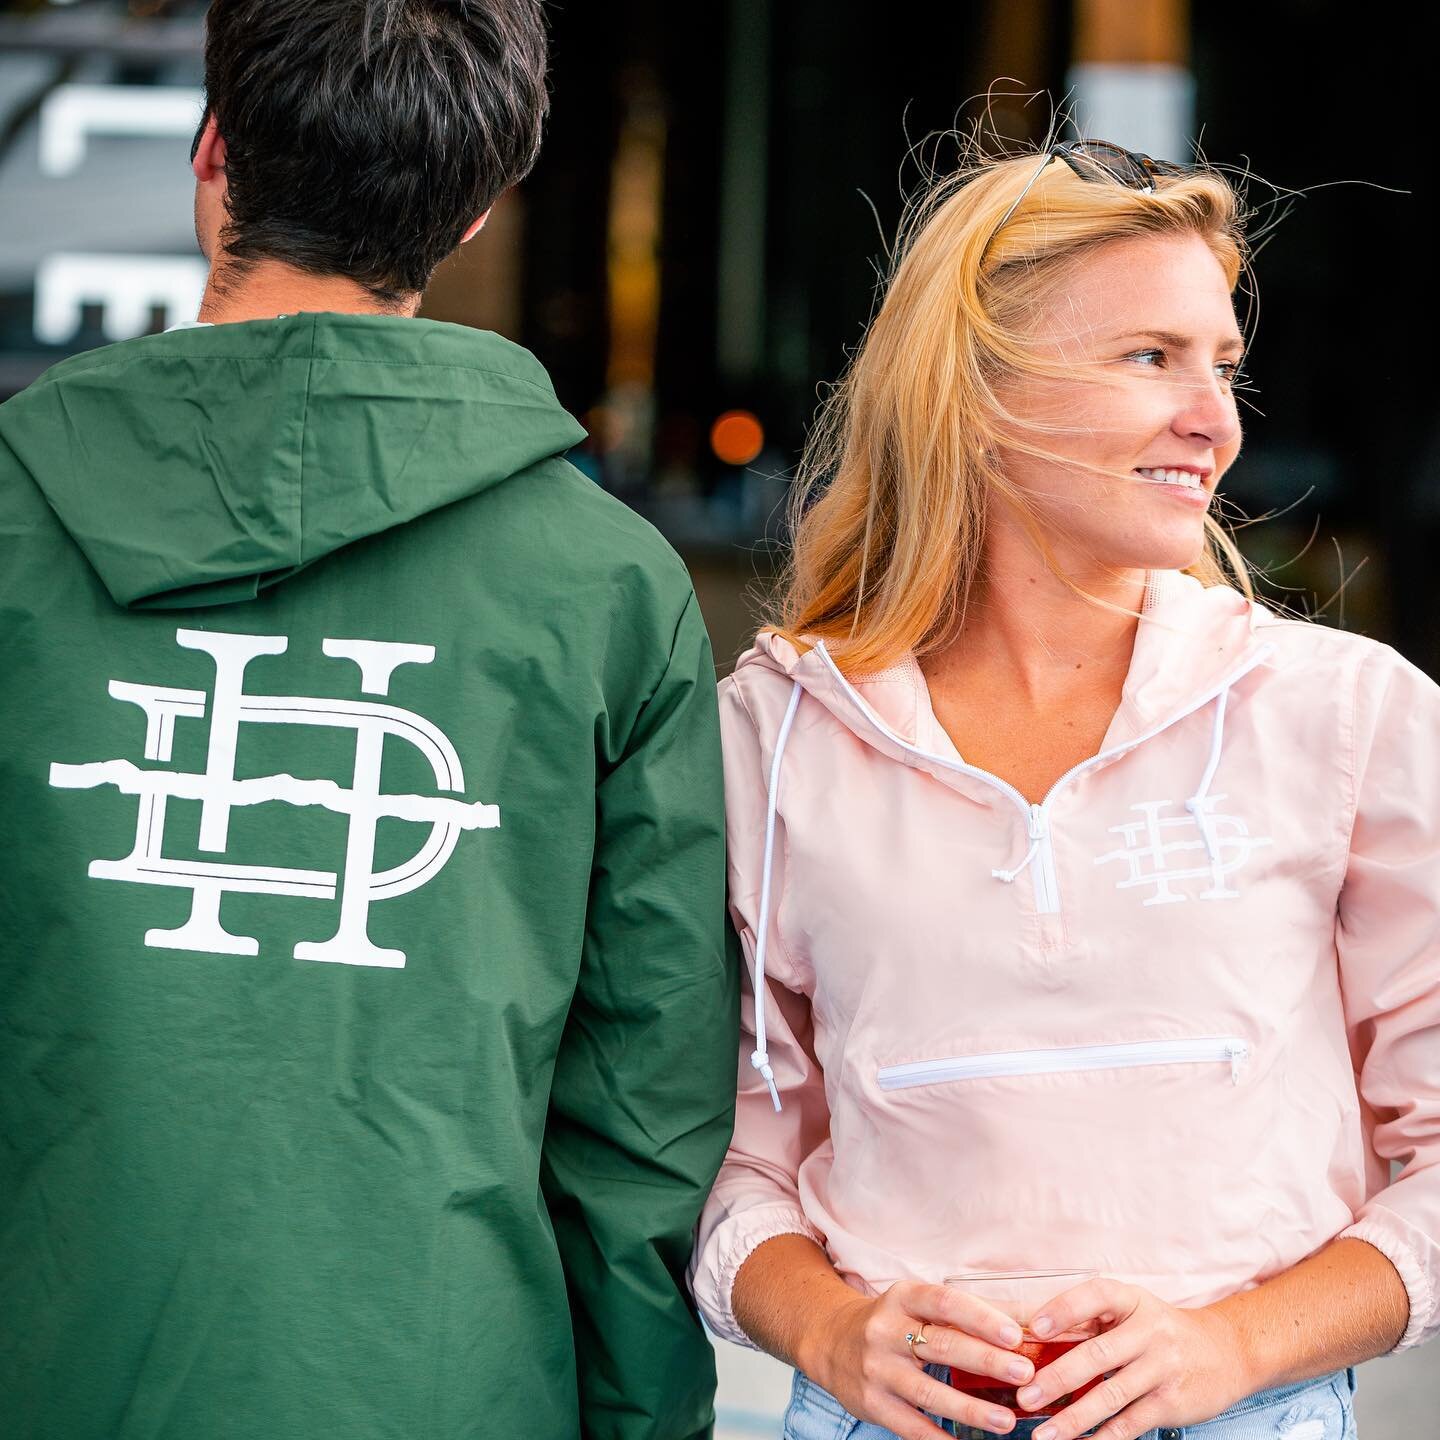 New jackets and sweatshirts, all approved for beach-side summer campfires, just arrived.